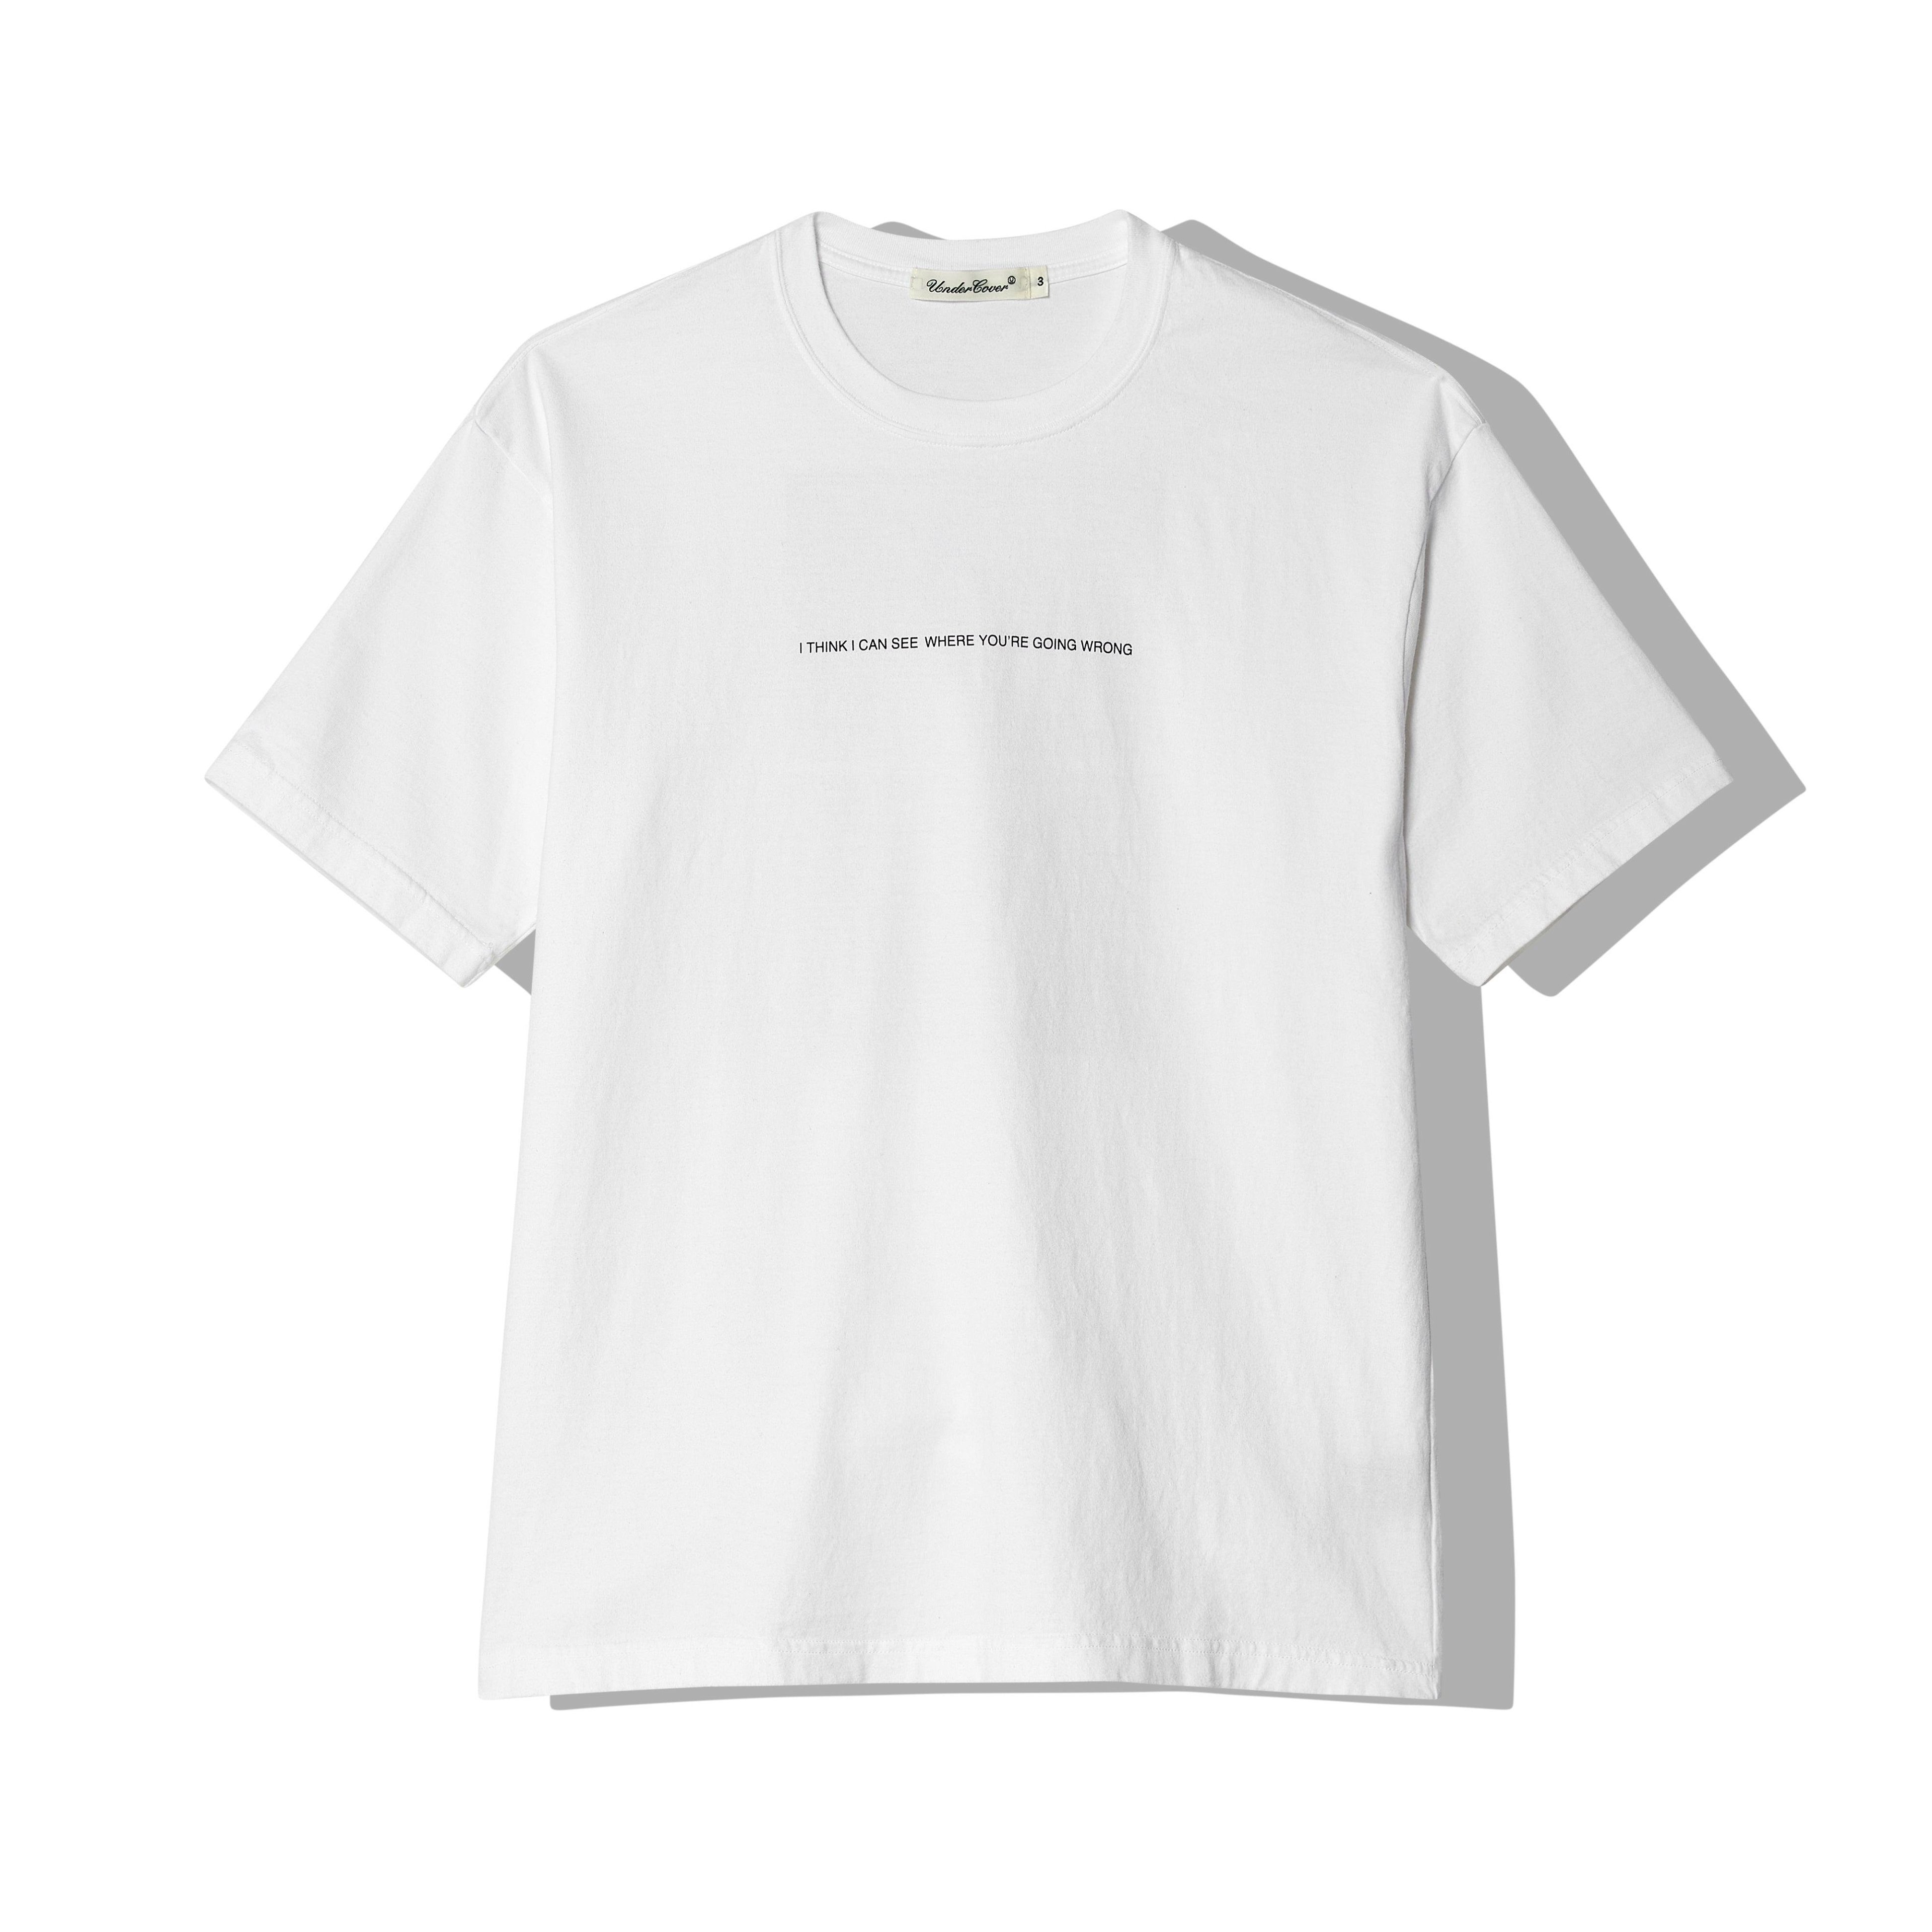 Undercover - Women's Graphic Tee - (White) by UNDERCOVER